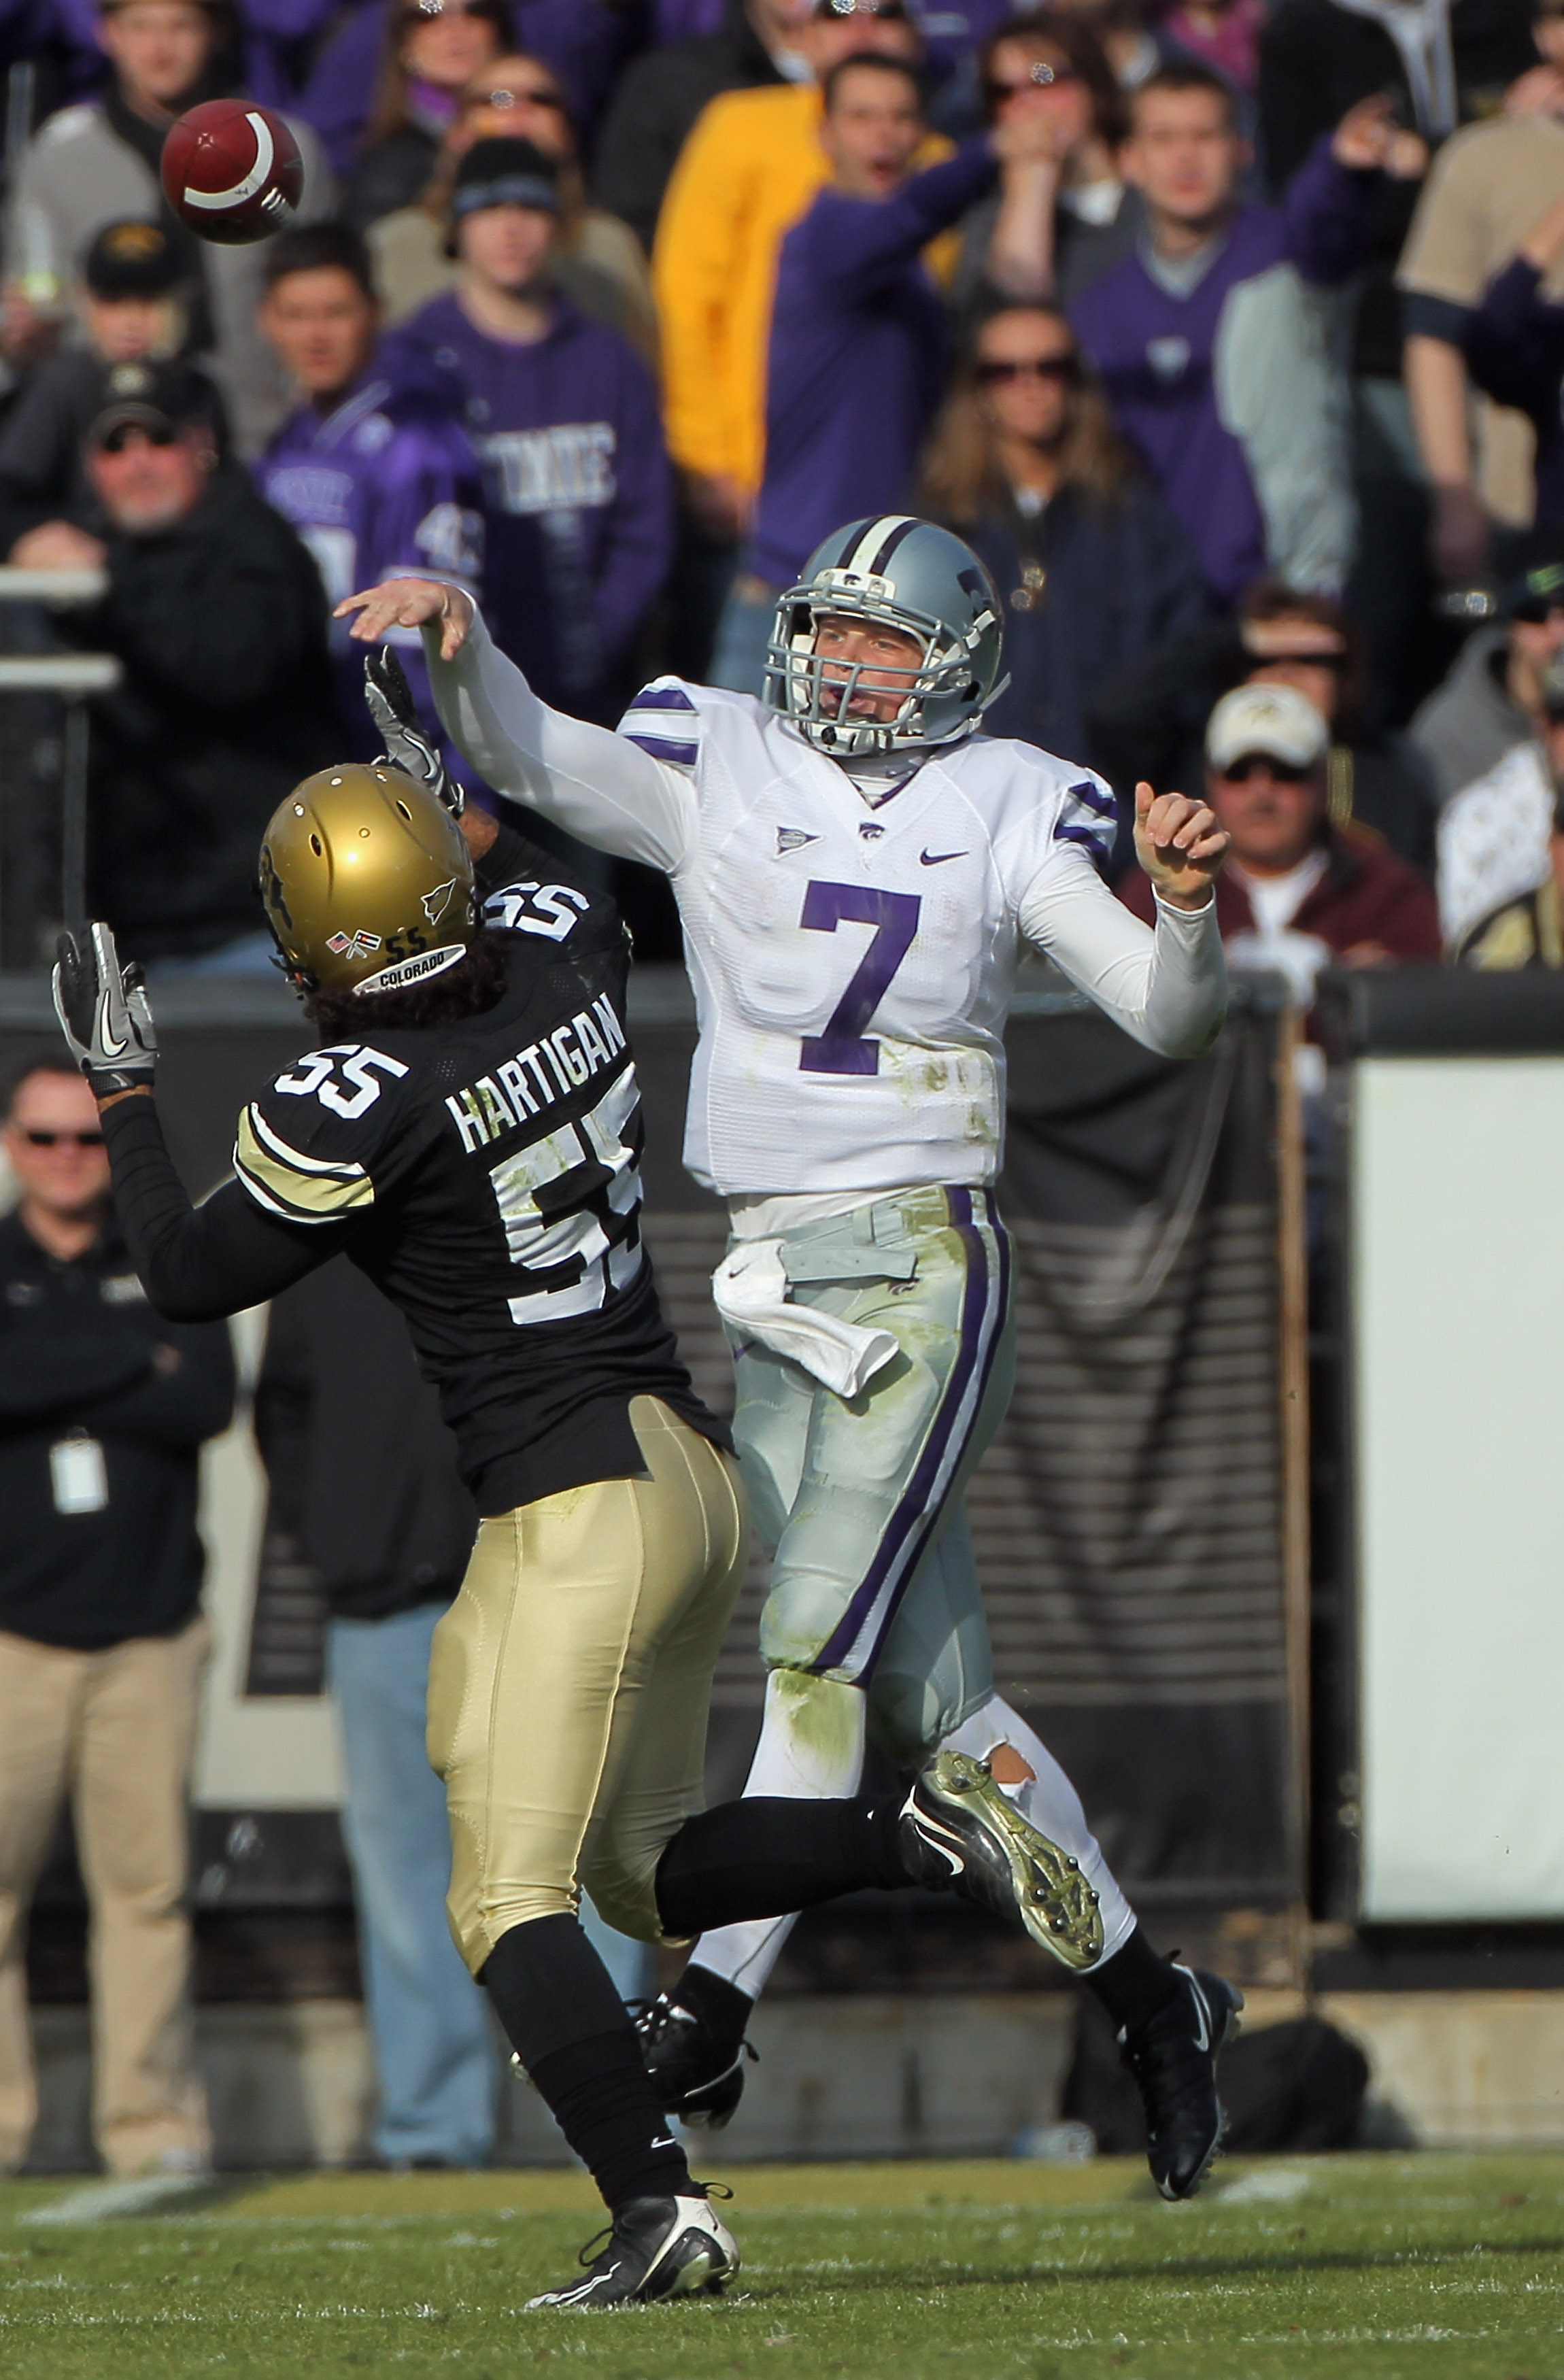 BOULDER, CO - NOVEMBER 20:  Quarterback Collin Klein #7 of the Kansas State Wildcats delivers a pass agsinst the defense of Josh Hartigan #55 of the Colorado Buffaloes at Folsom Field on November 20, 2010 in Boulder, Colorado. Colorado defeated Kansas Sta